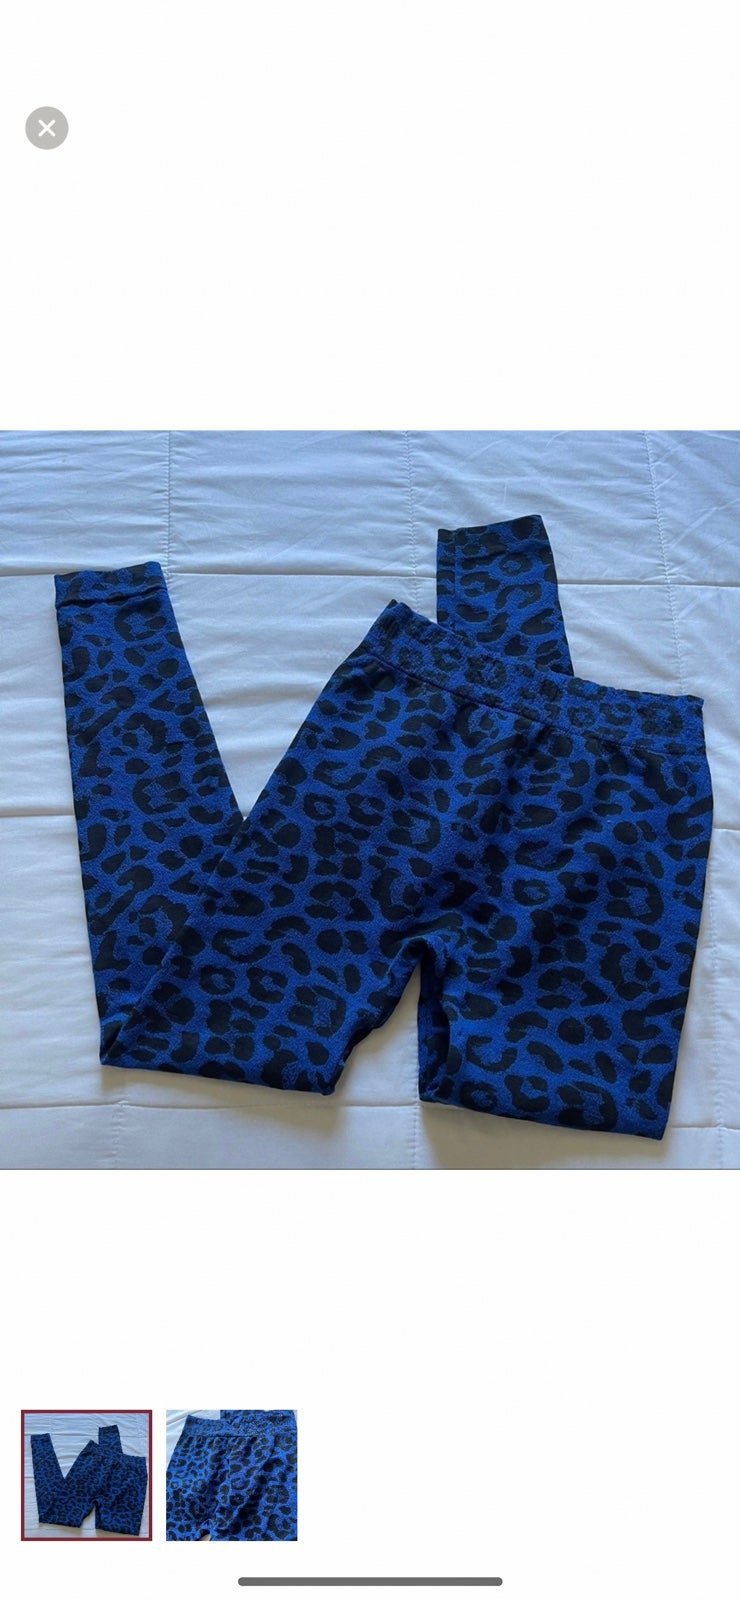 Discounted Blue leopard leggings fQInronQY just for you